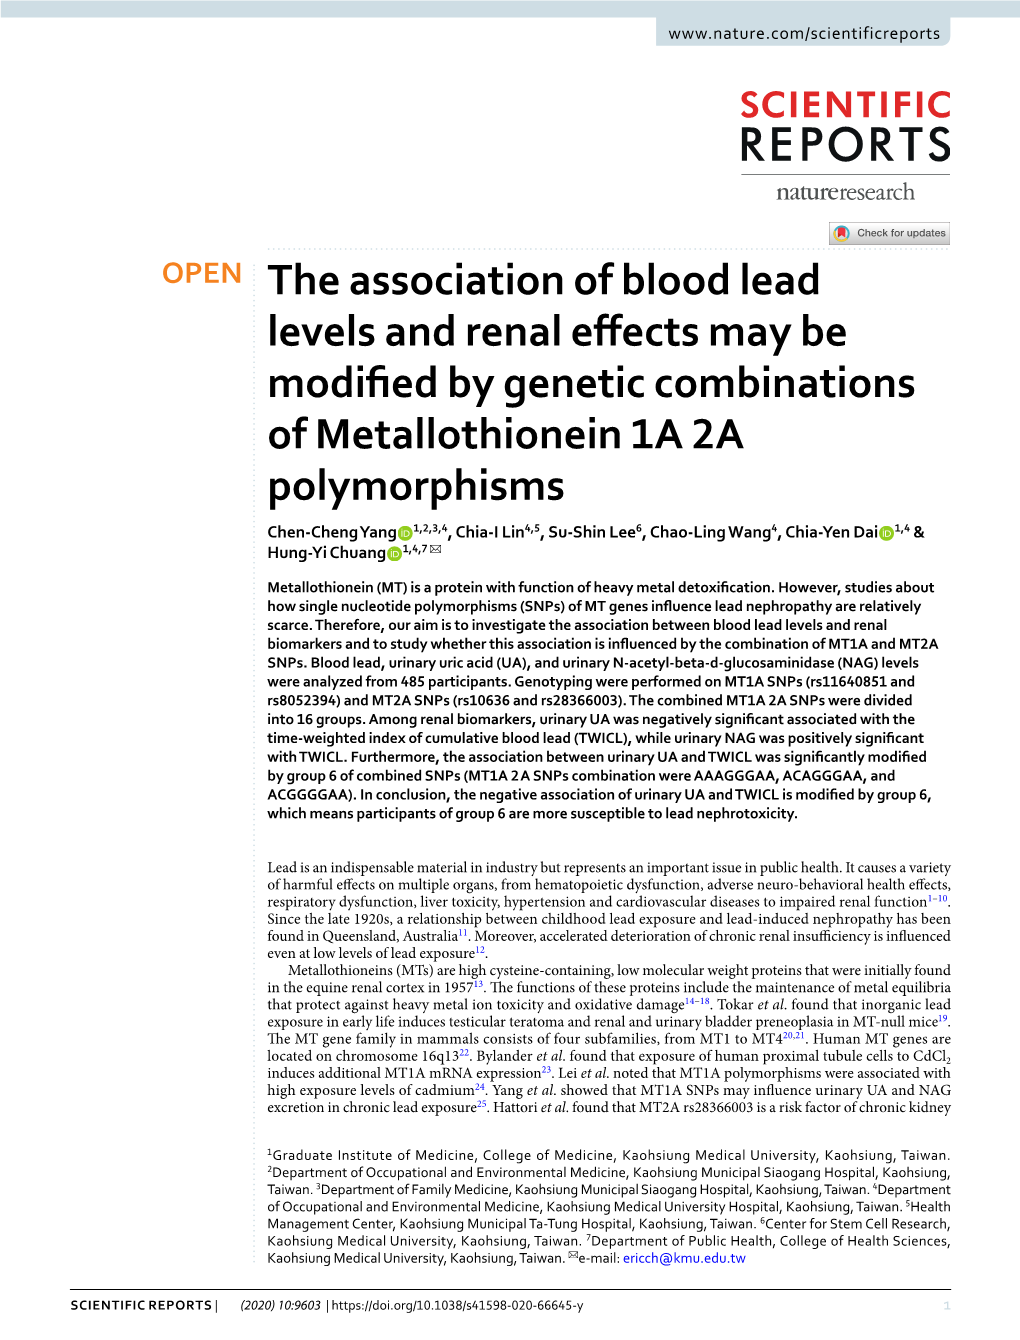 The Association of Blood Lead Levels and Renal Effects May Be Modified